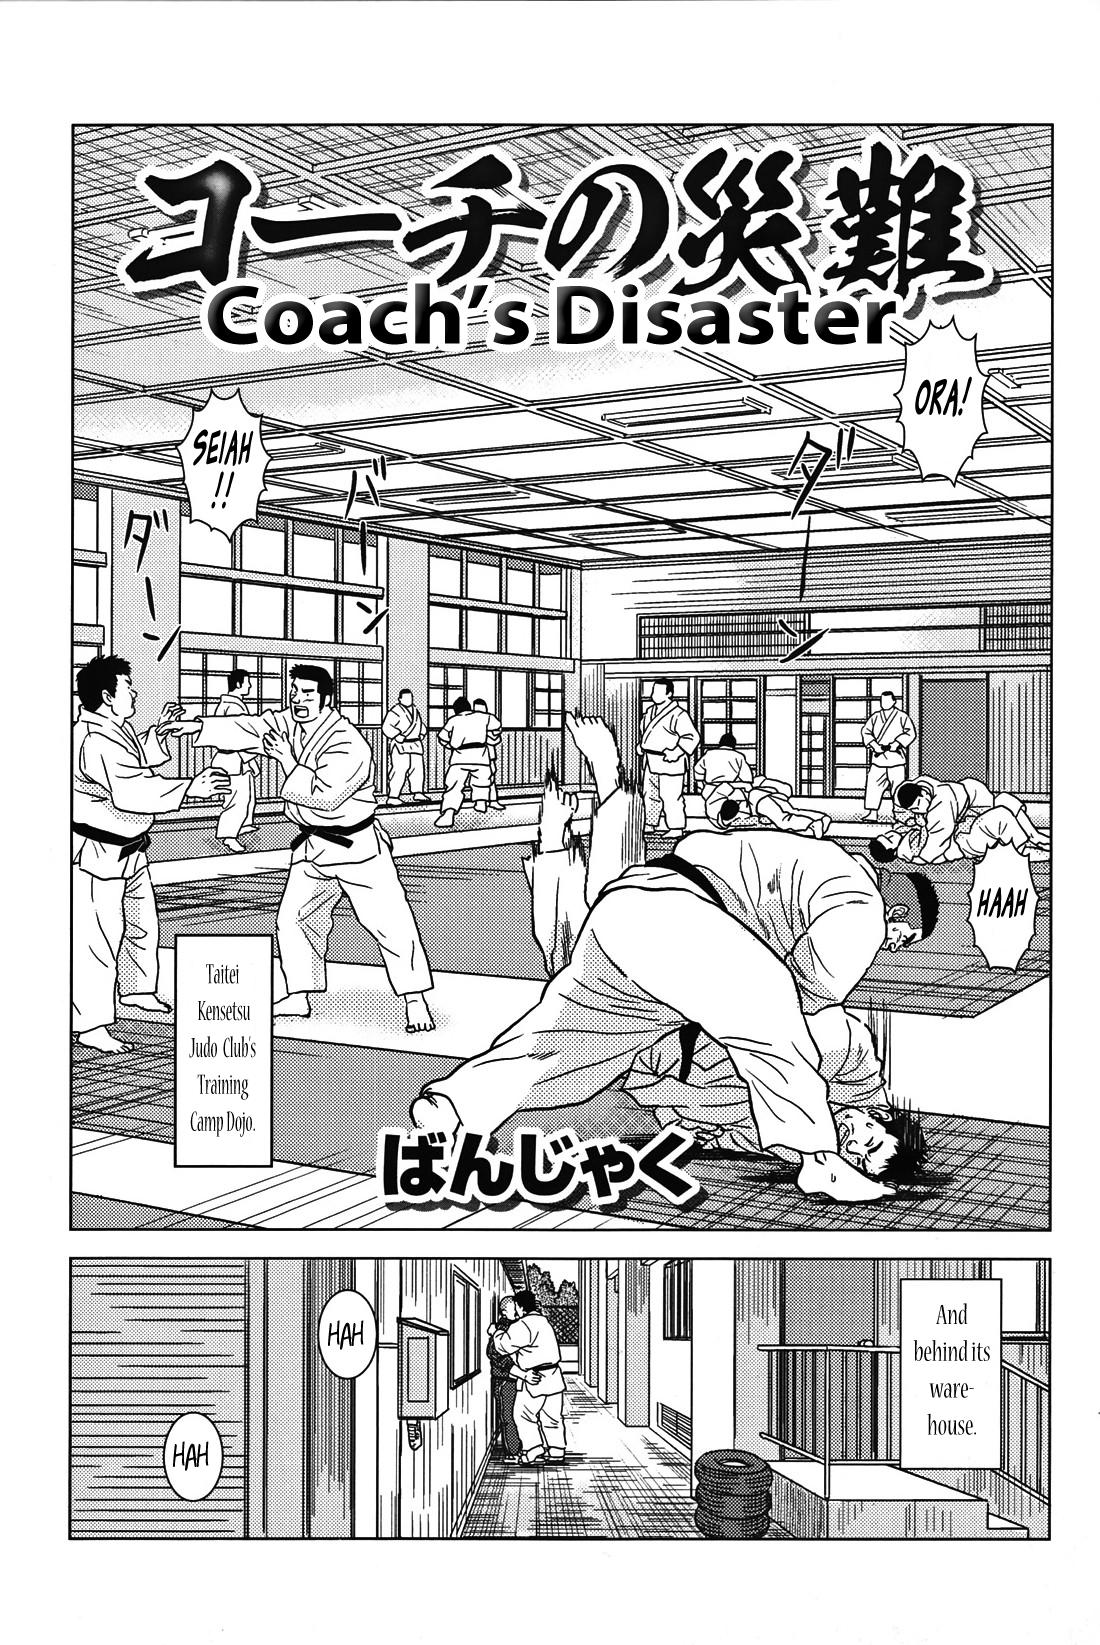 Coach's Disaster 1